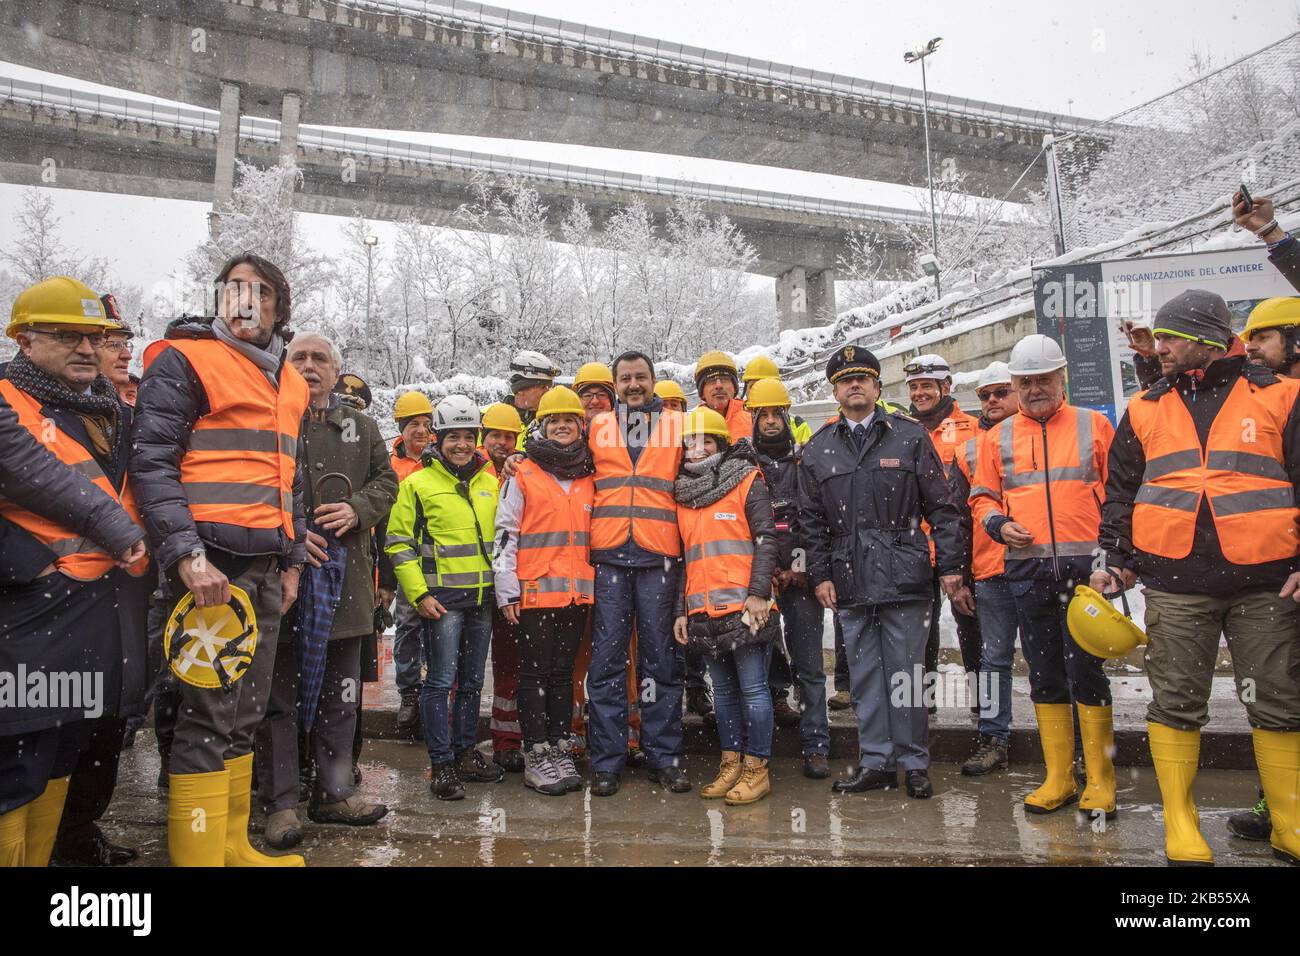 Matteo Salvini, Deputy Prime Minister of Italy and Minister of the Interior, visits part of the new high-speed TAV rail line in the construction site of the main tunnel near Chiomonte, on Febuary 1, 2019. Matteo Salvini is a supporter of the project differently from others 5stars ministers. This create many troubles in the difficult equilibrium of the government which now rules Italy. (Photo by Mauro Ujetto/NurPhoto) Stock Photo